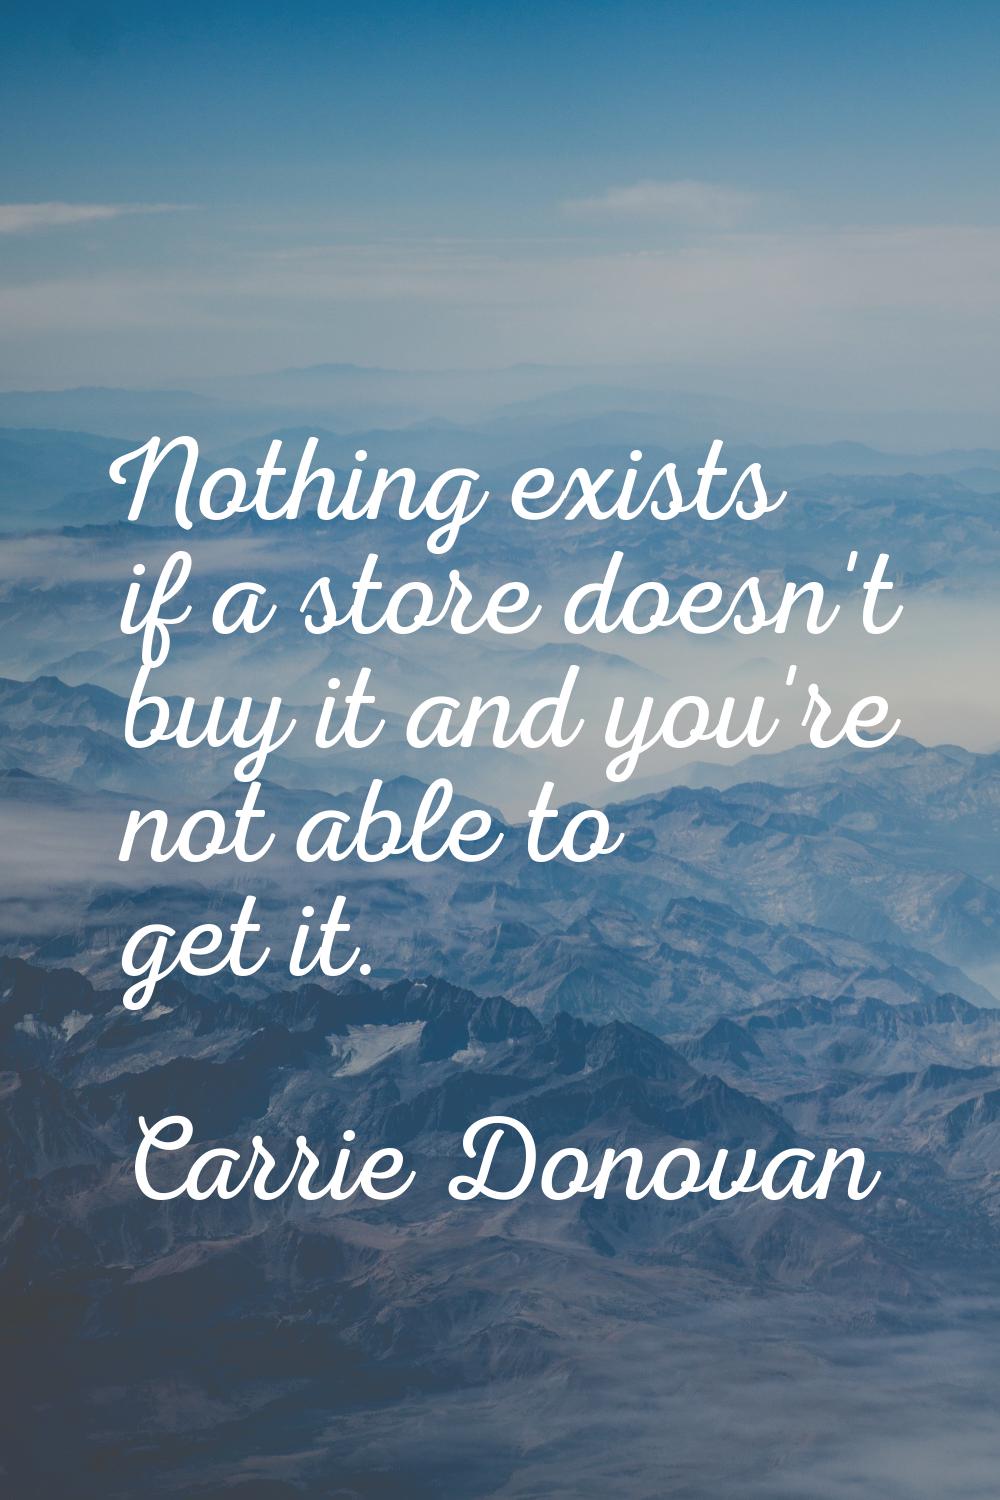 Nothing exists if a store doesn't buy it and you're not able to get it.